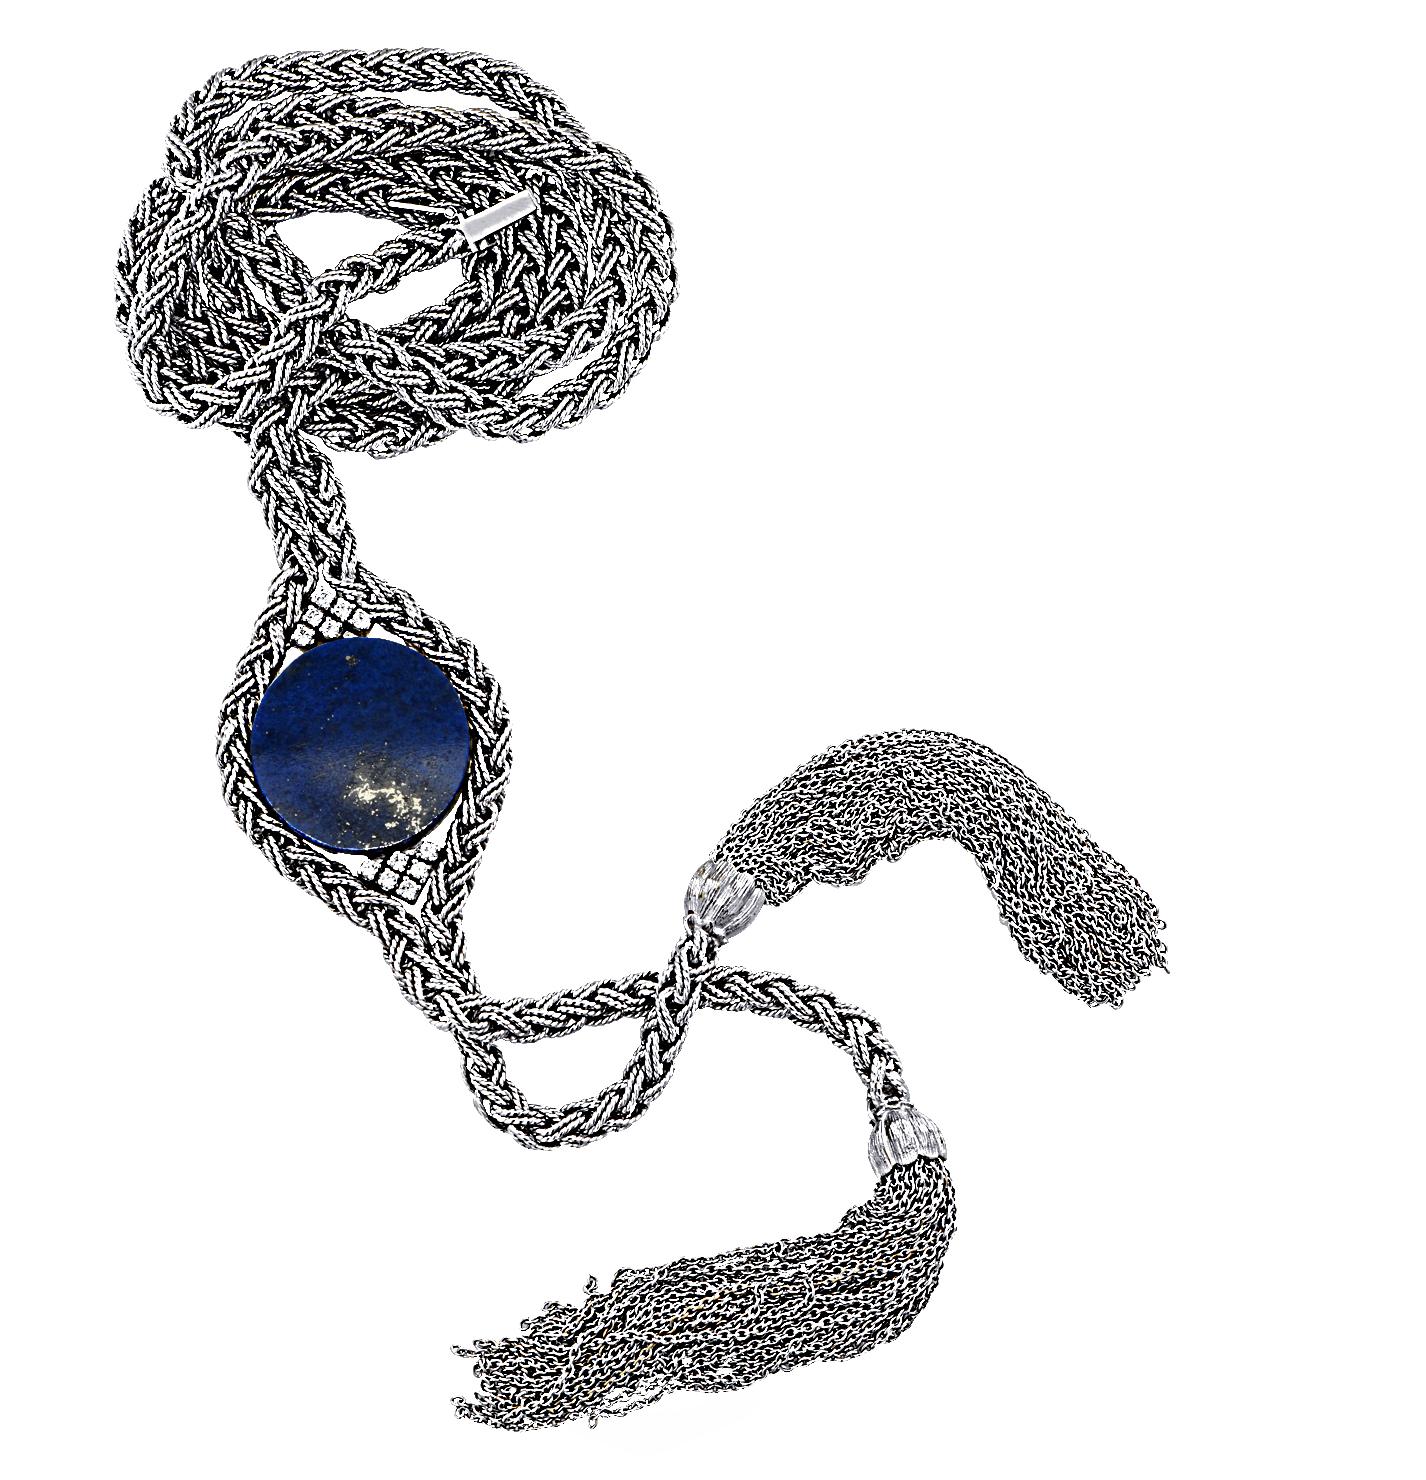 Stunning sautoir necklace circa 1970, crafted in 18 karat white gold, featuring a lapis disc measuring 0.95 inches in diameter, accented by 12 round brilliant cut diamonds weighing approximately 0.30 carats total, G color, Vs clarity. The rope chain